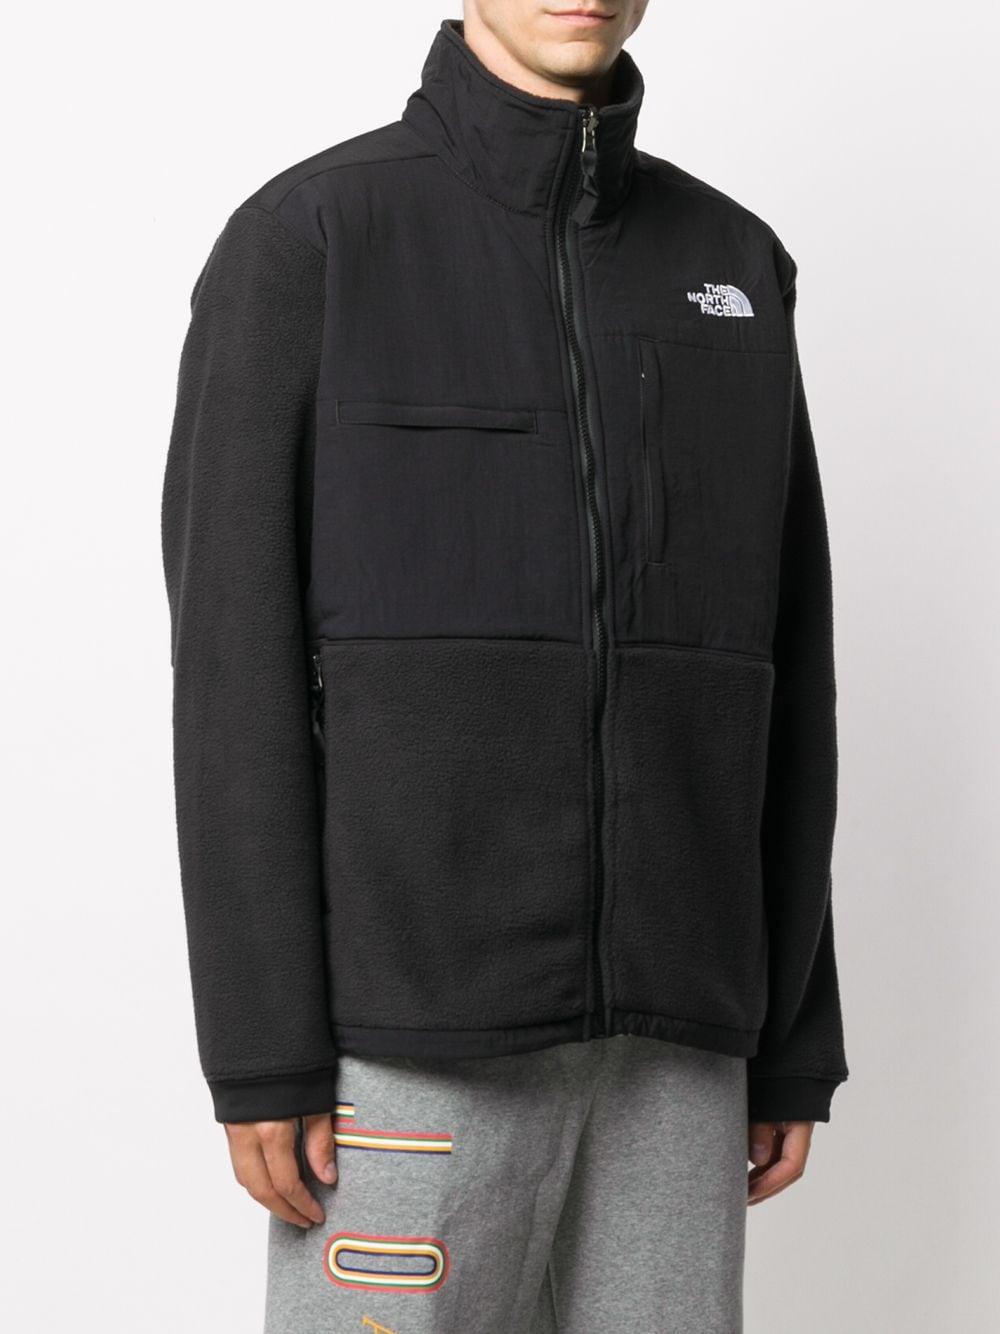 The North Face Zipped Logo Jacket in Black for Men - Lyst